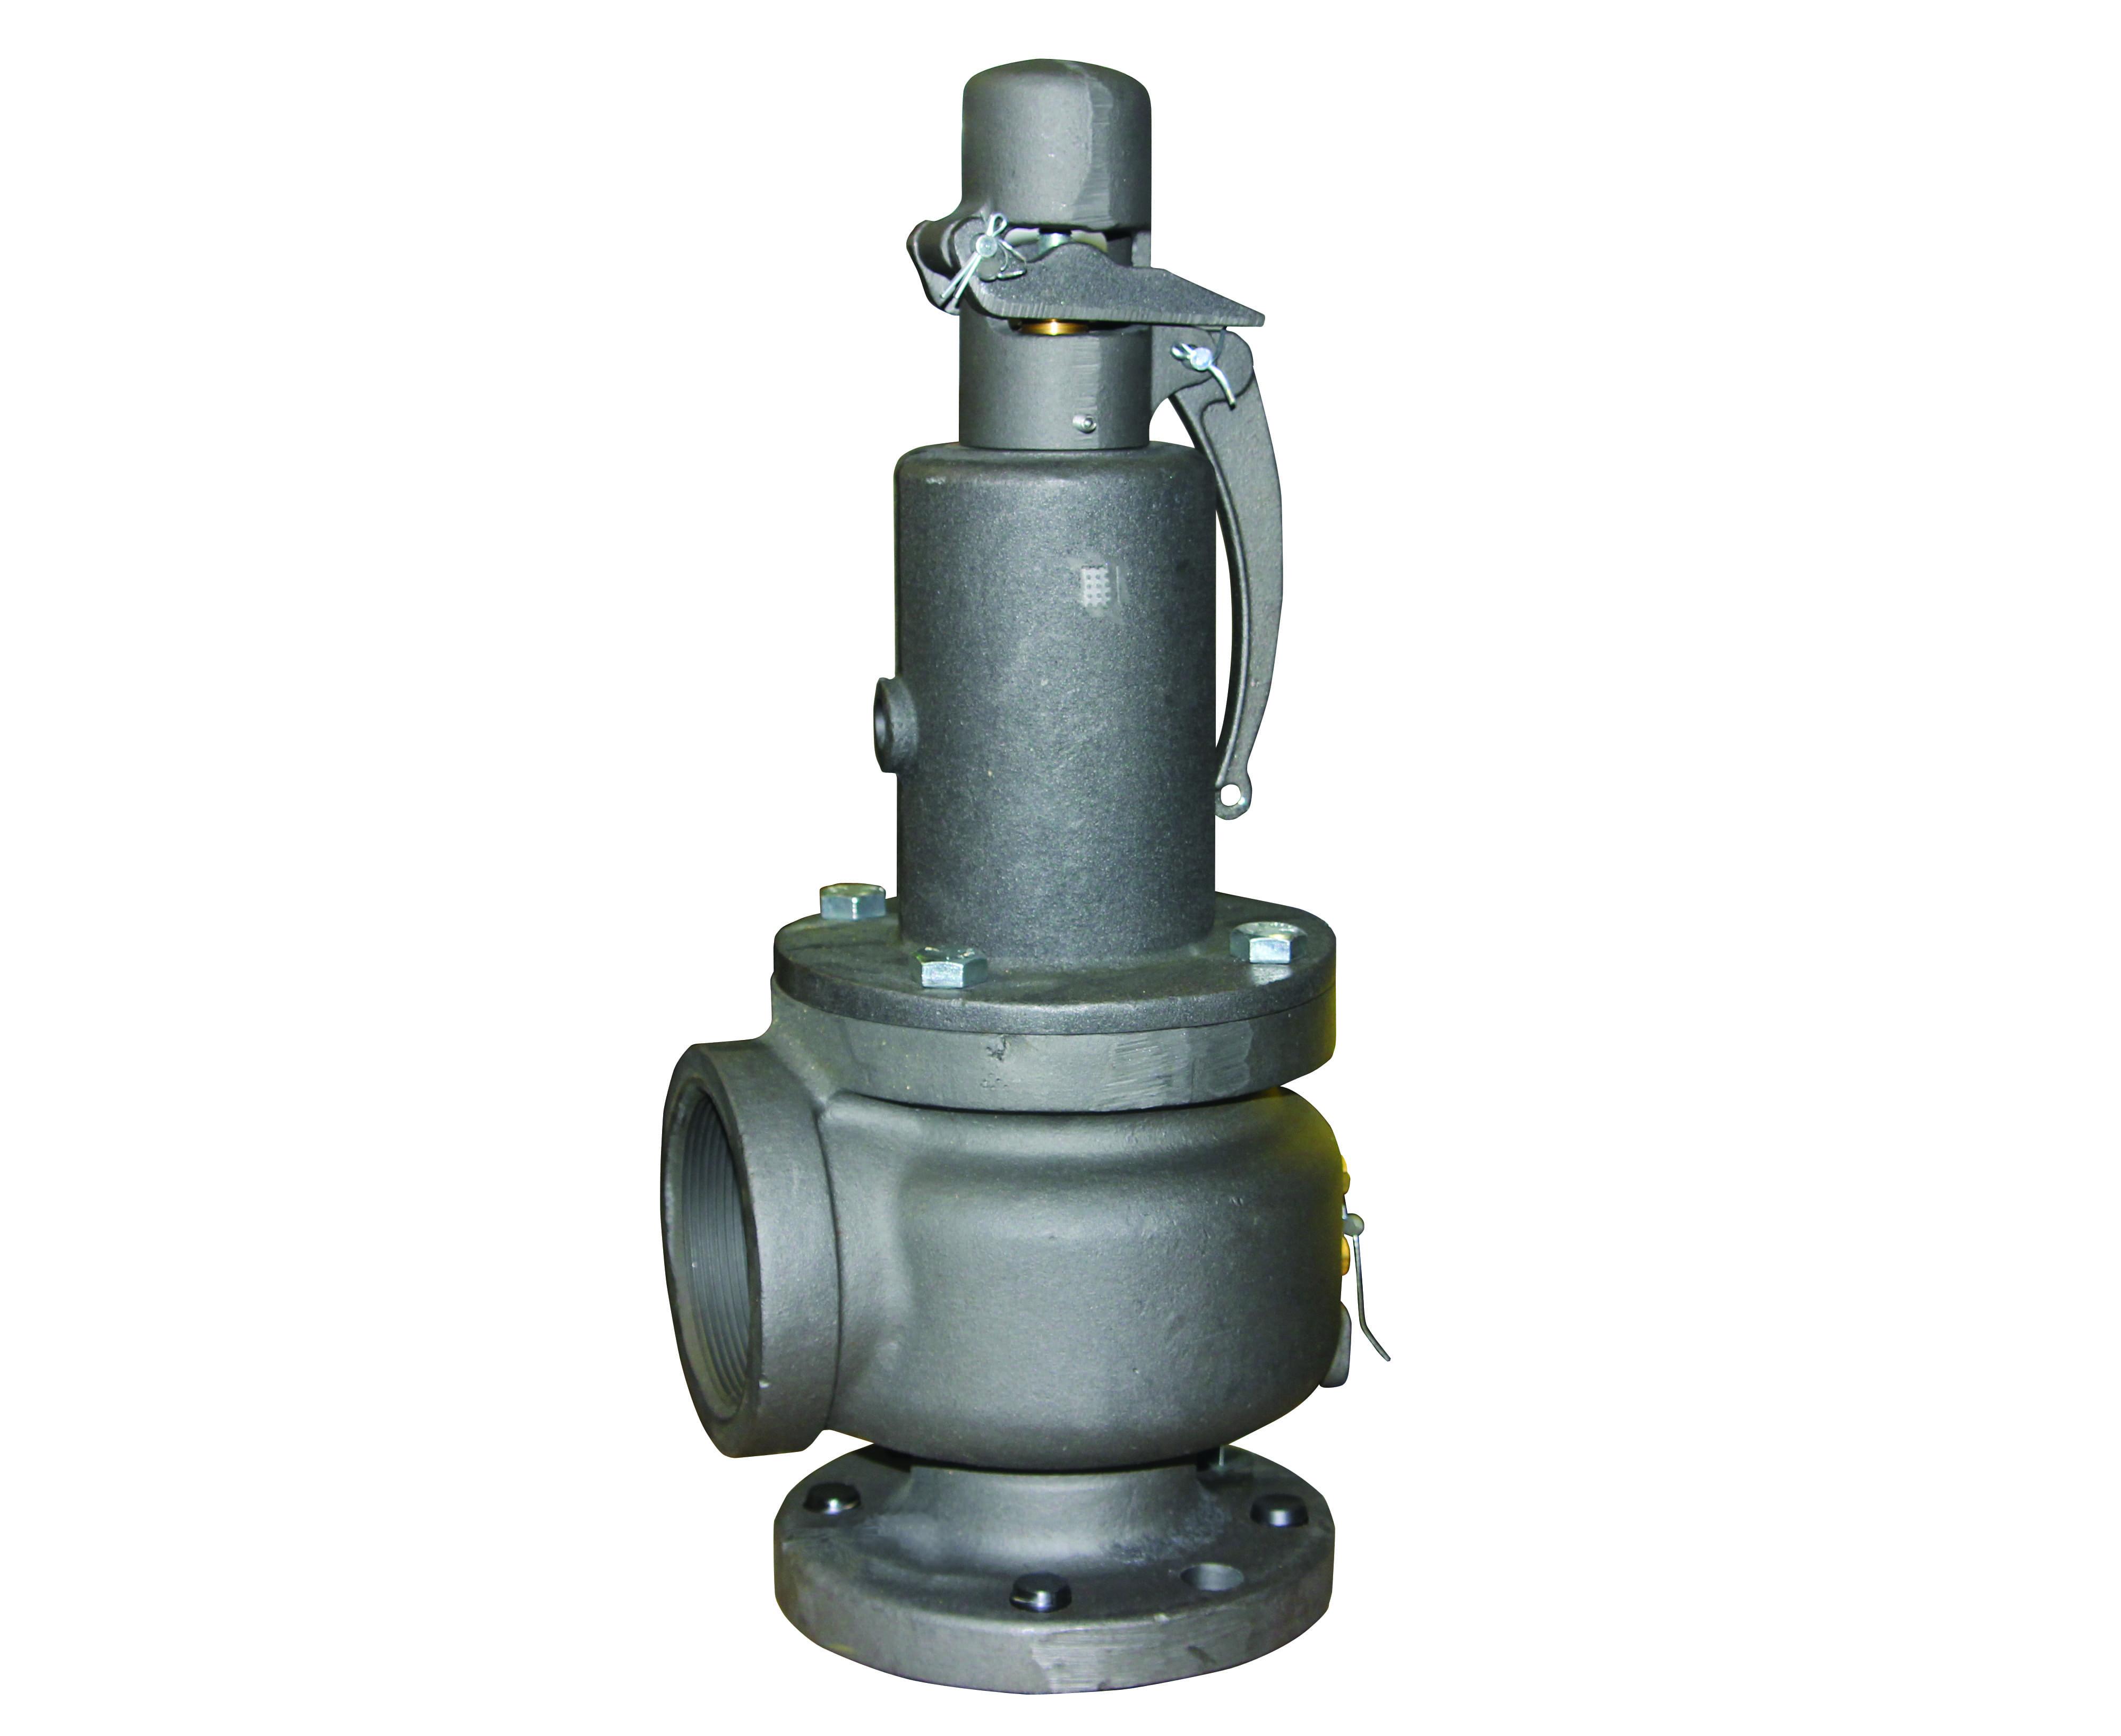 Preview image for Apollo ASME Section VIII Air Cast Iron Safety Relief Valve, 2-1/2" x 4" (Flange x FNPT)